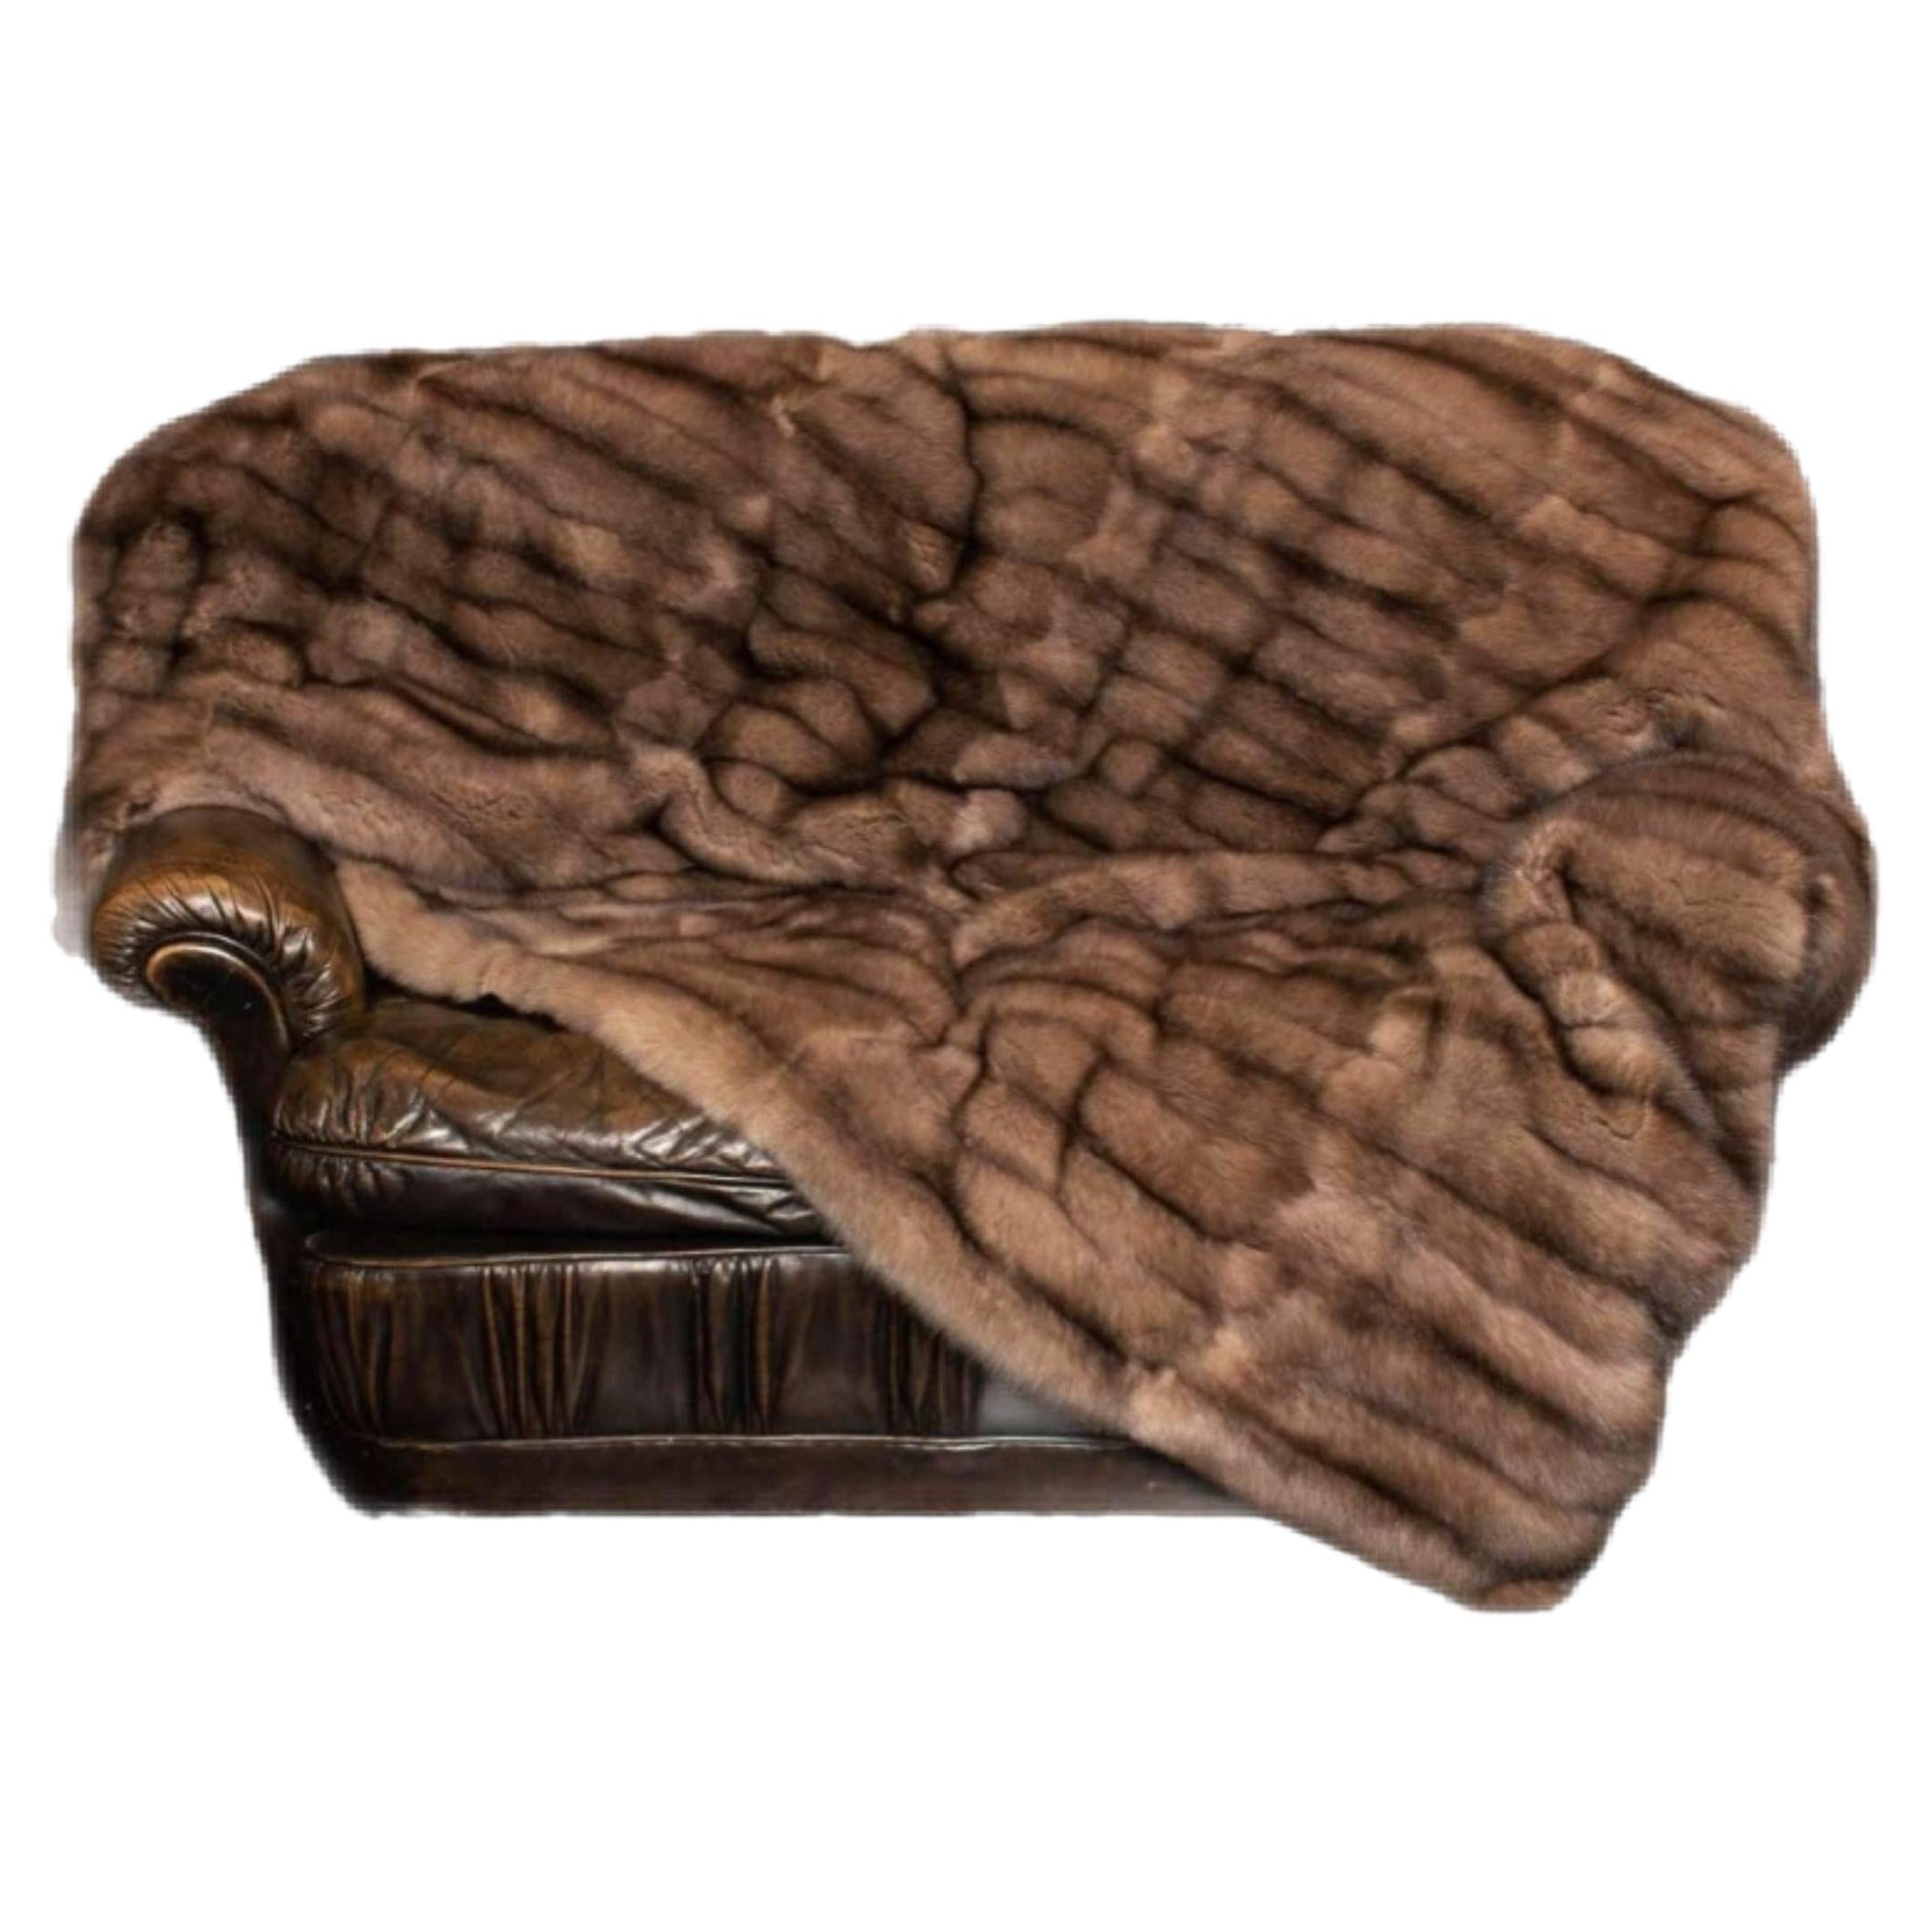 Brand New Russian Sable Fur Blanket (Queen Size 90"x100") For Sale